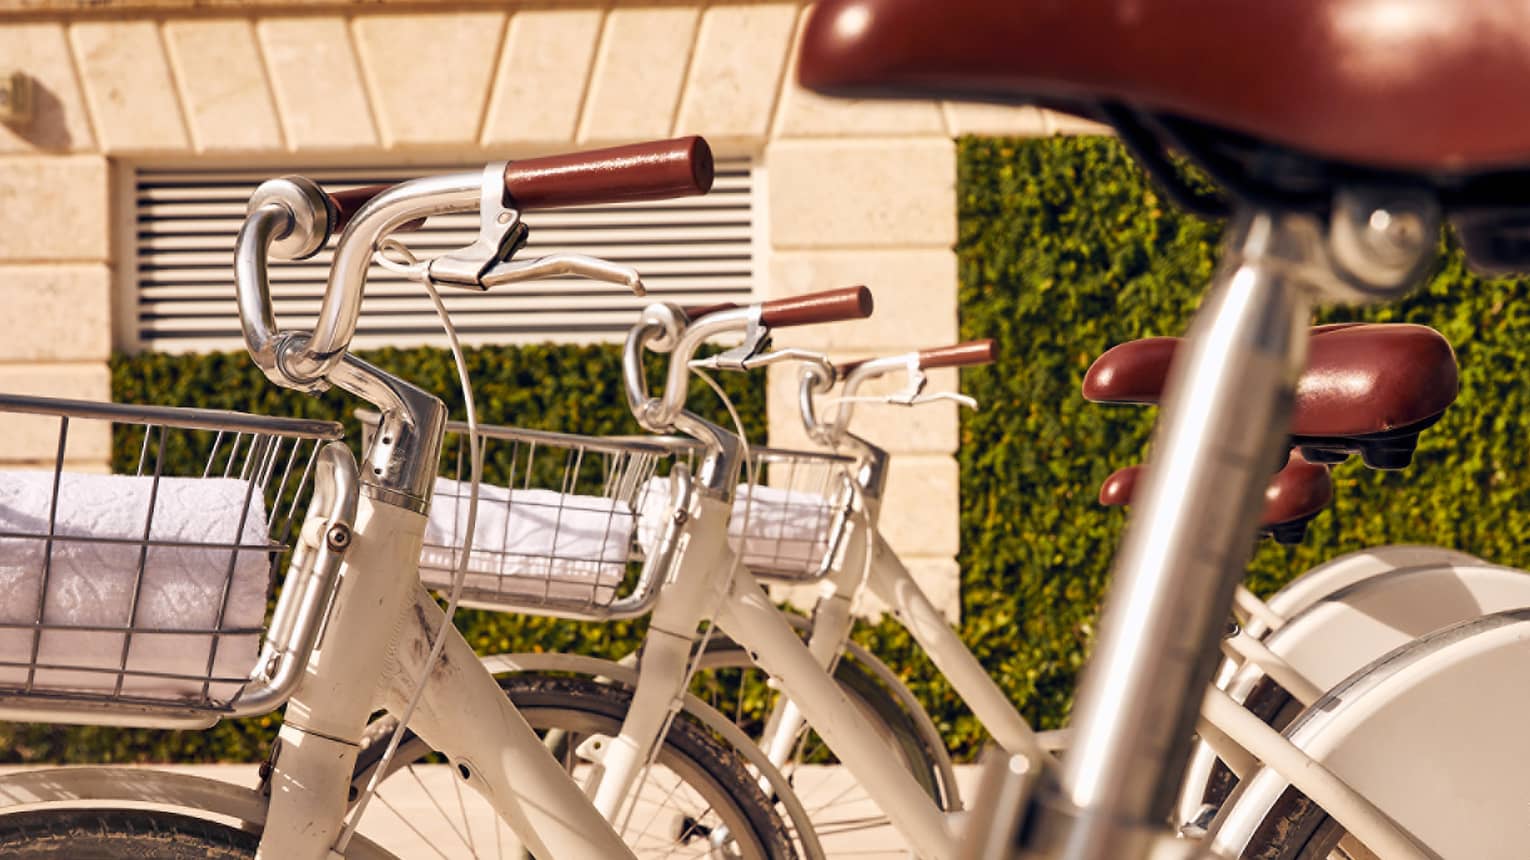 A close up image of white bikes with baskets.